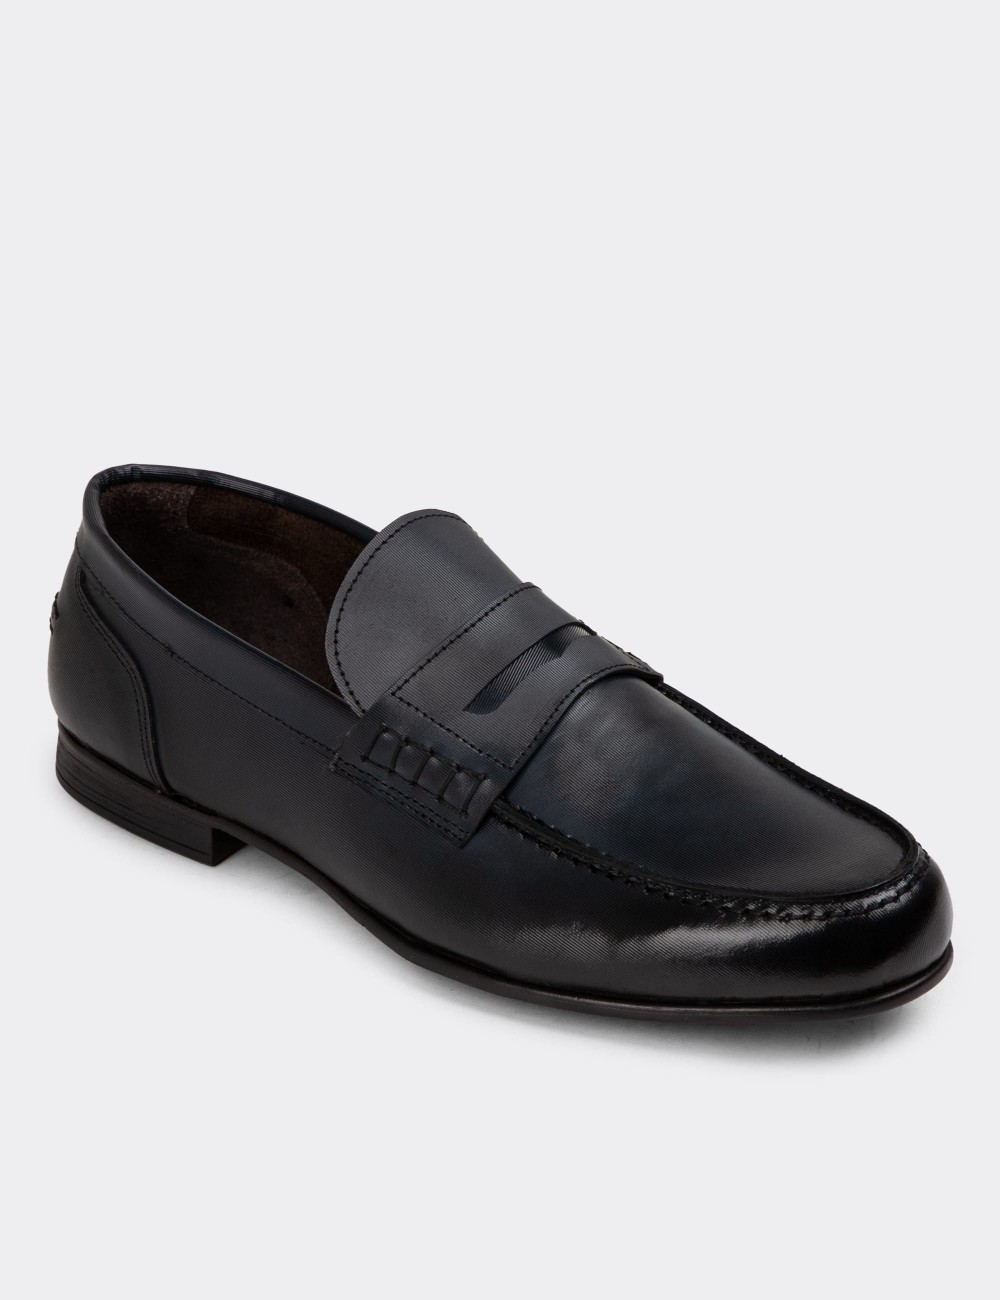 Anthracite Leather Loafers - 01978MANTC01